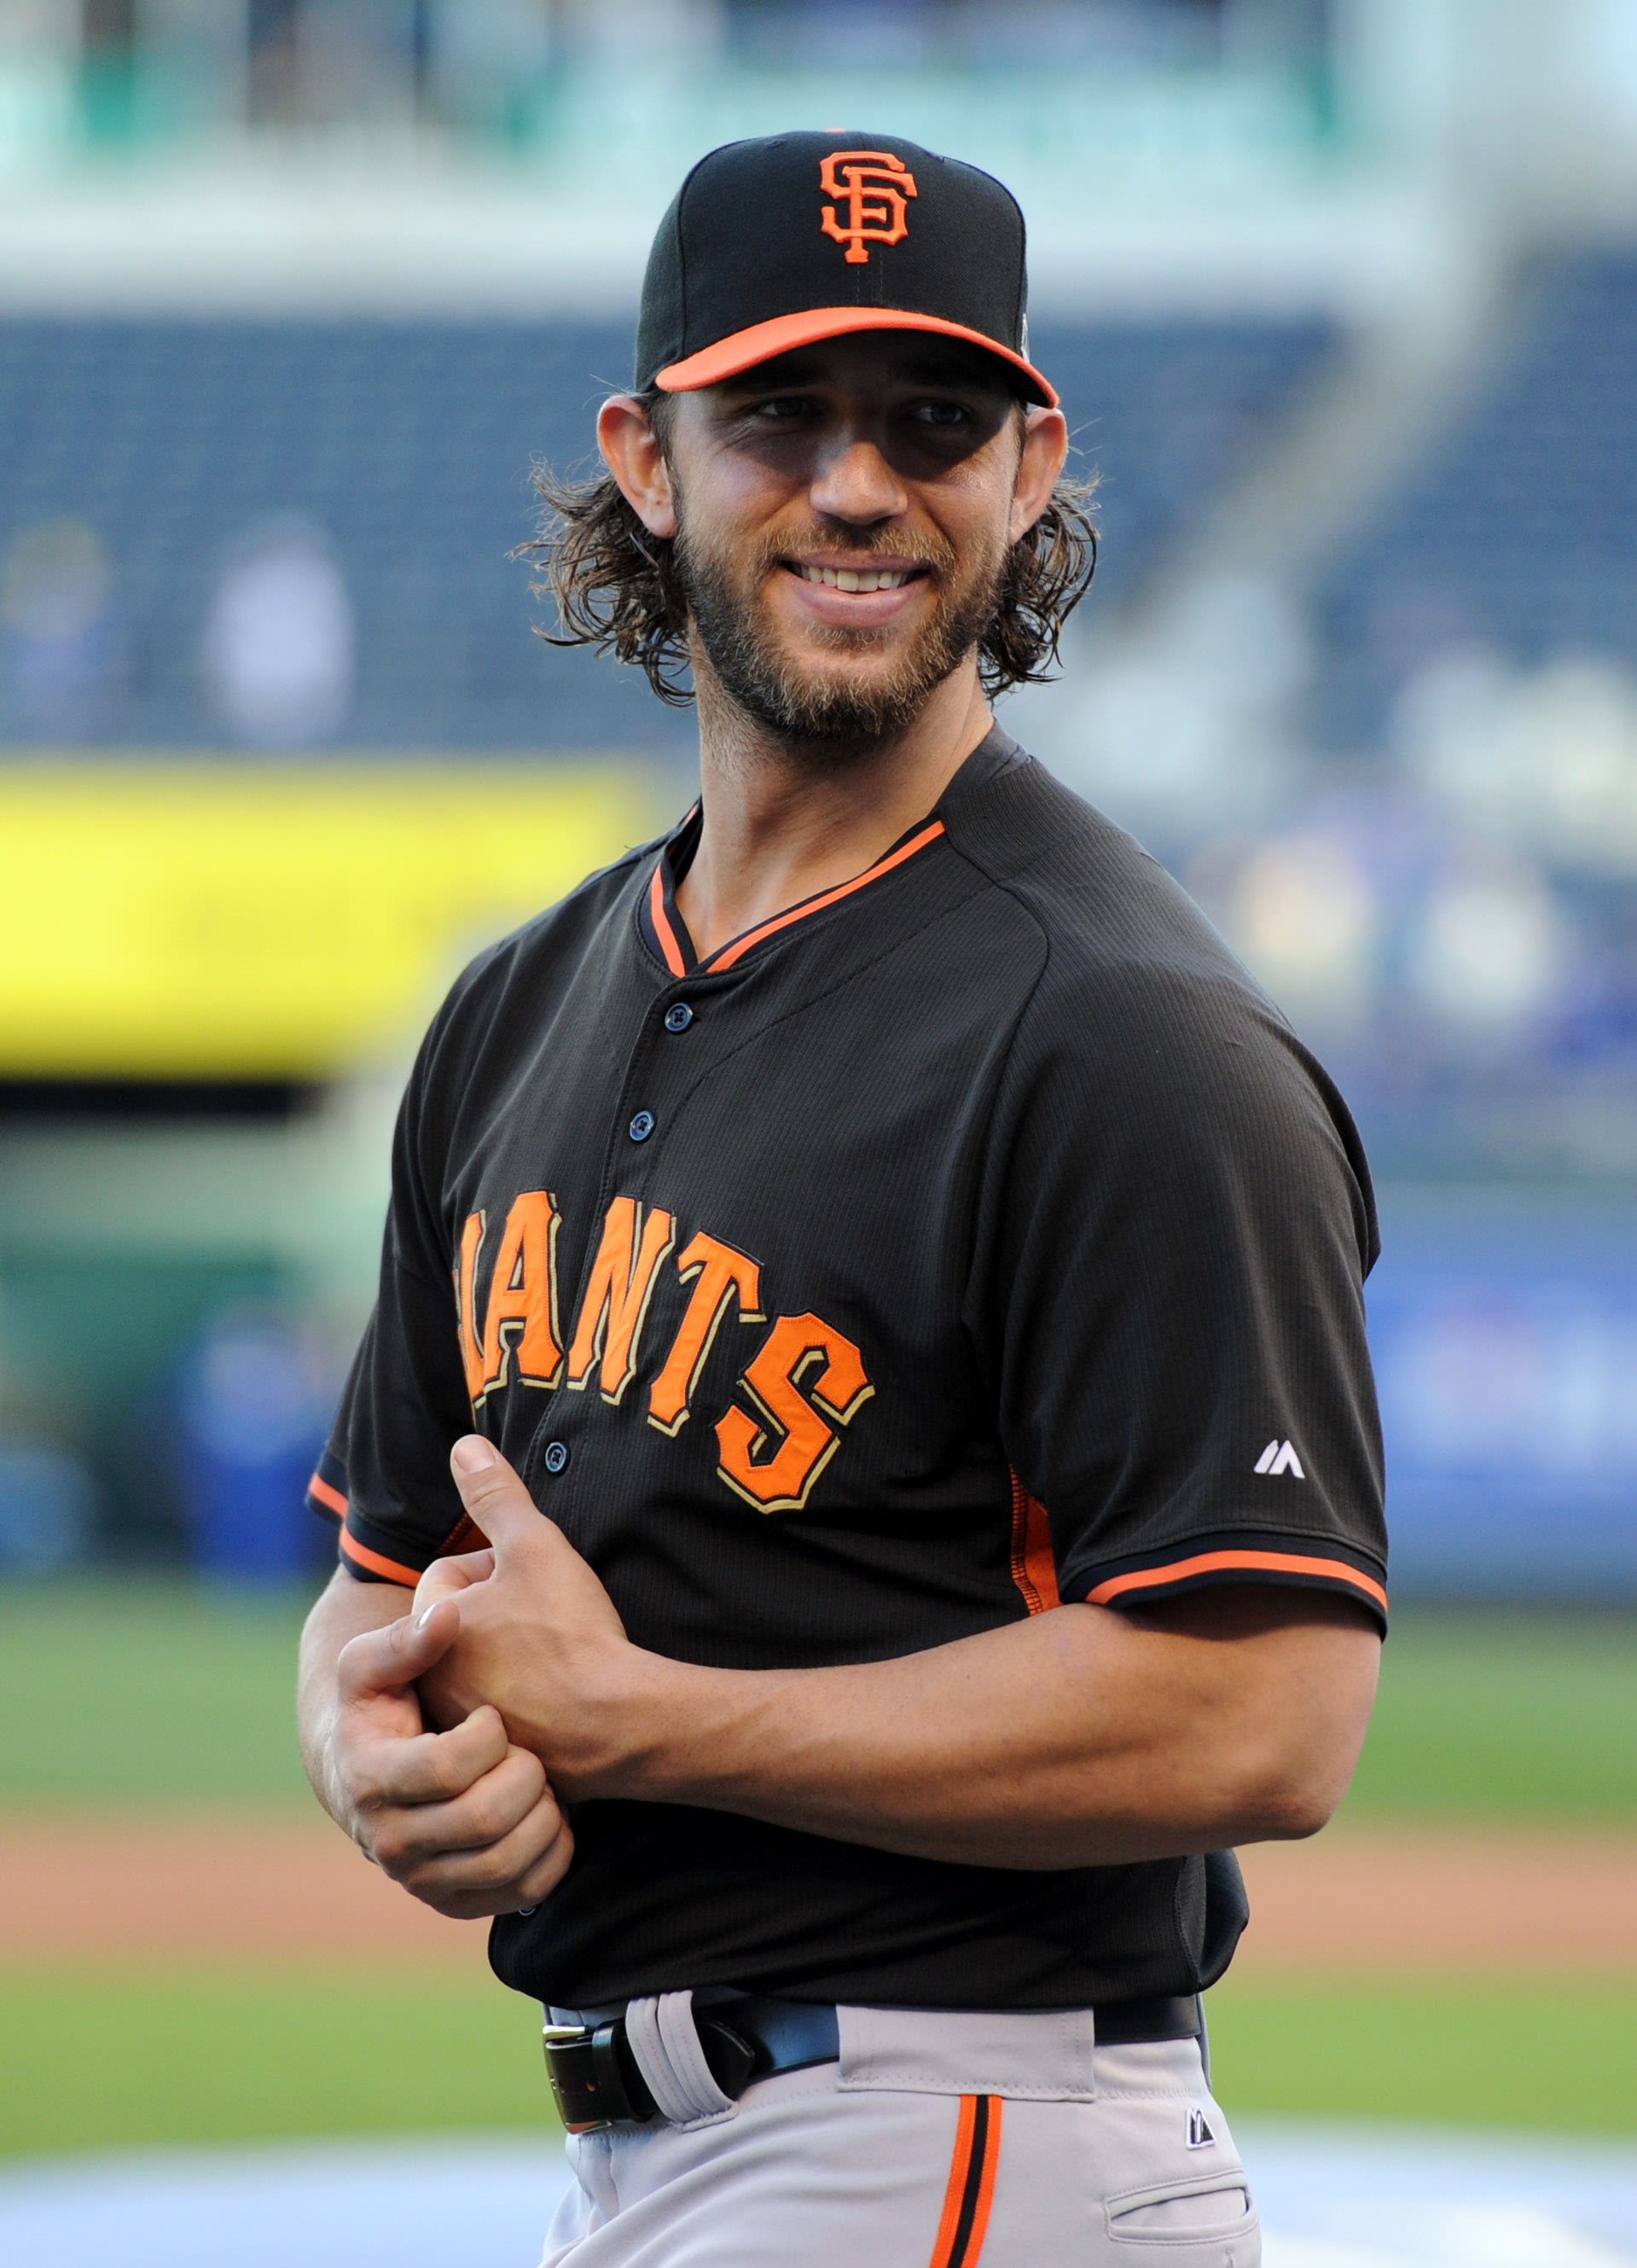 Madison Bumgarner has a 0.29 career ERA in the World Series. (USA Today)